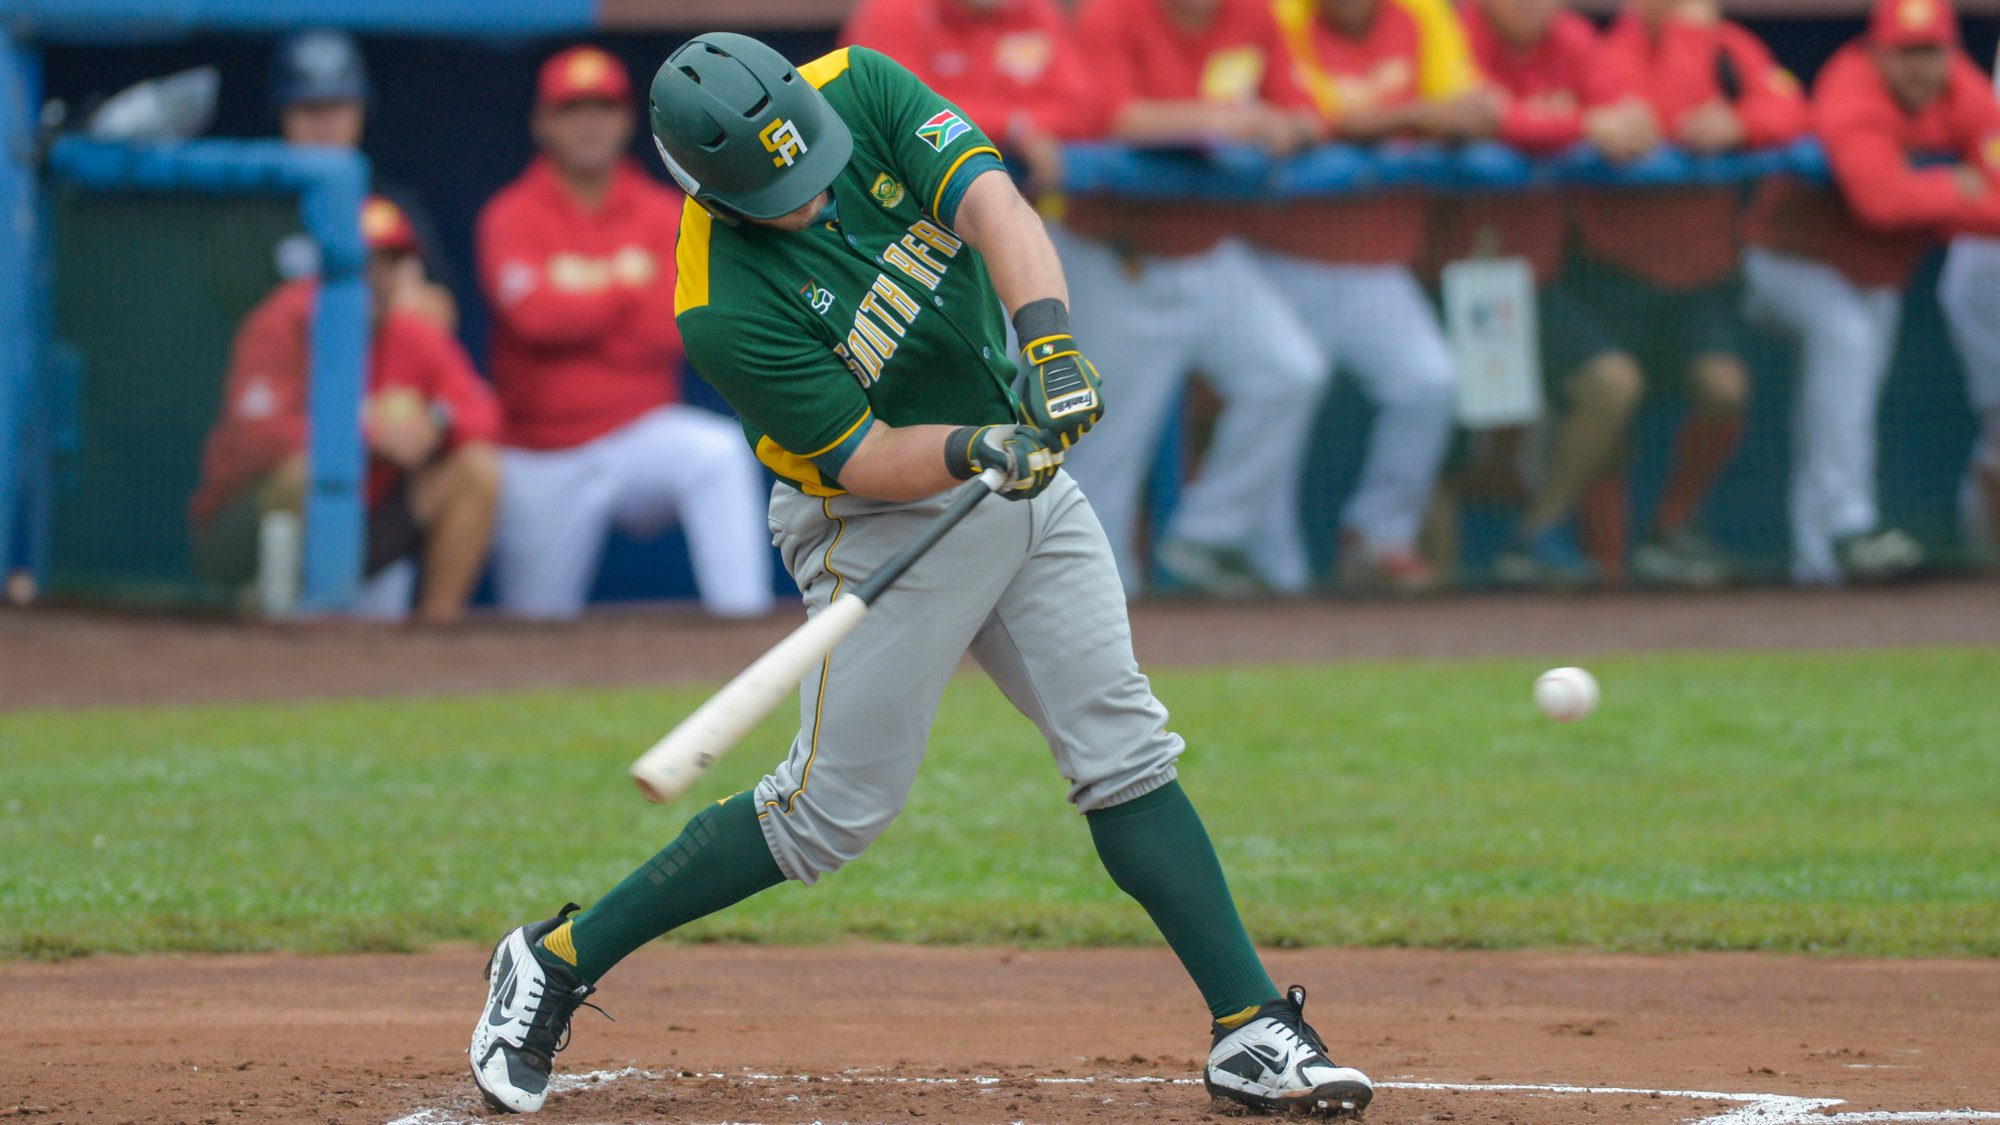 South African Olympic baseball hopes suffer setback at Tokyo 2020 qualifier 